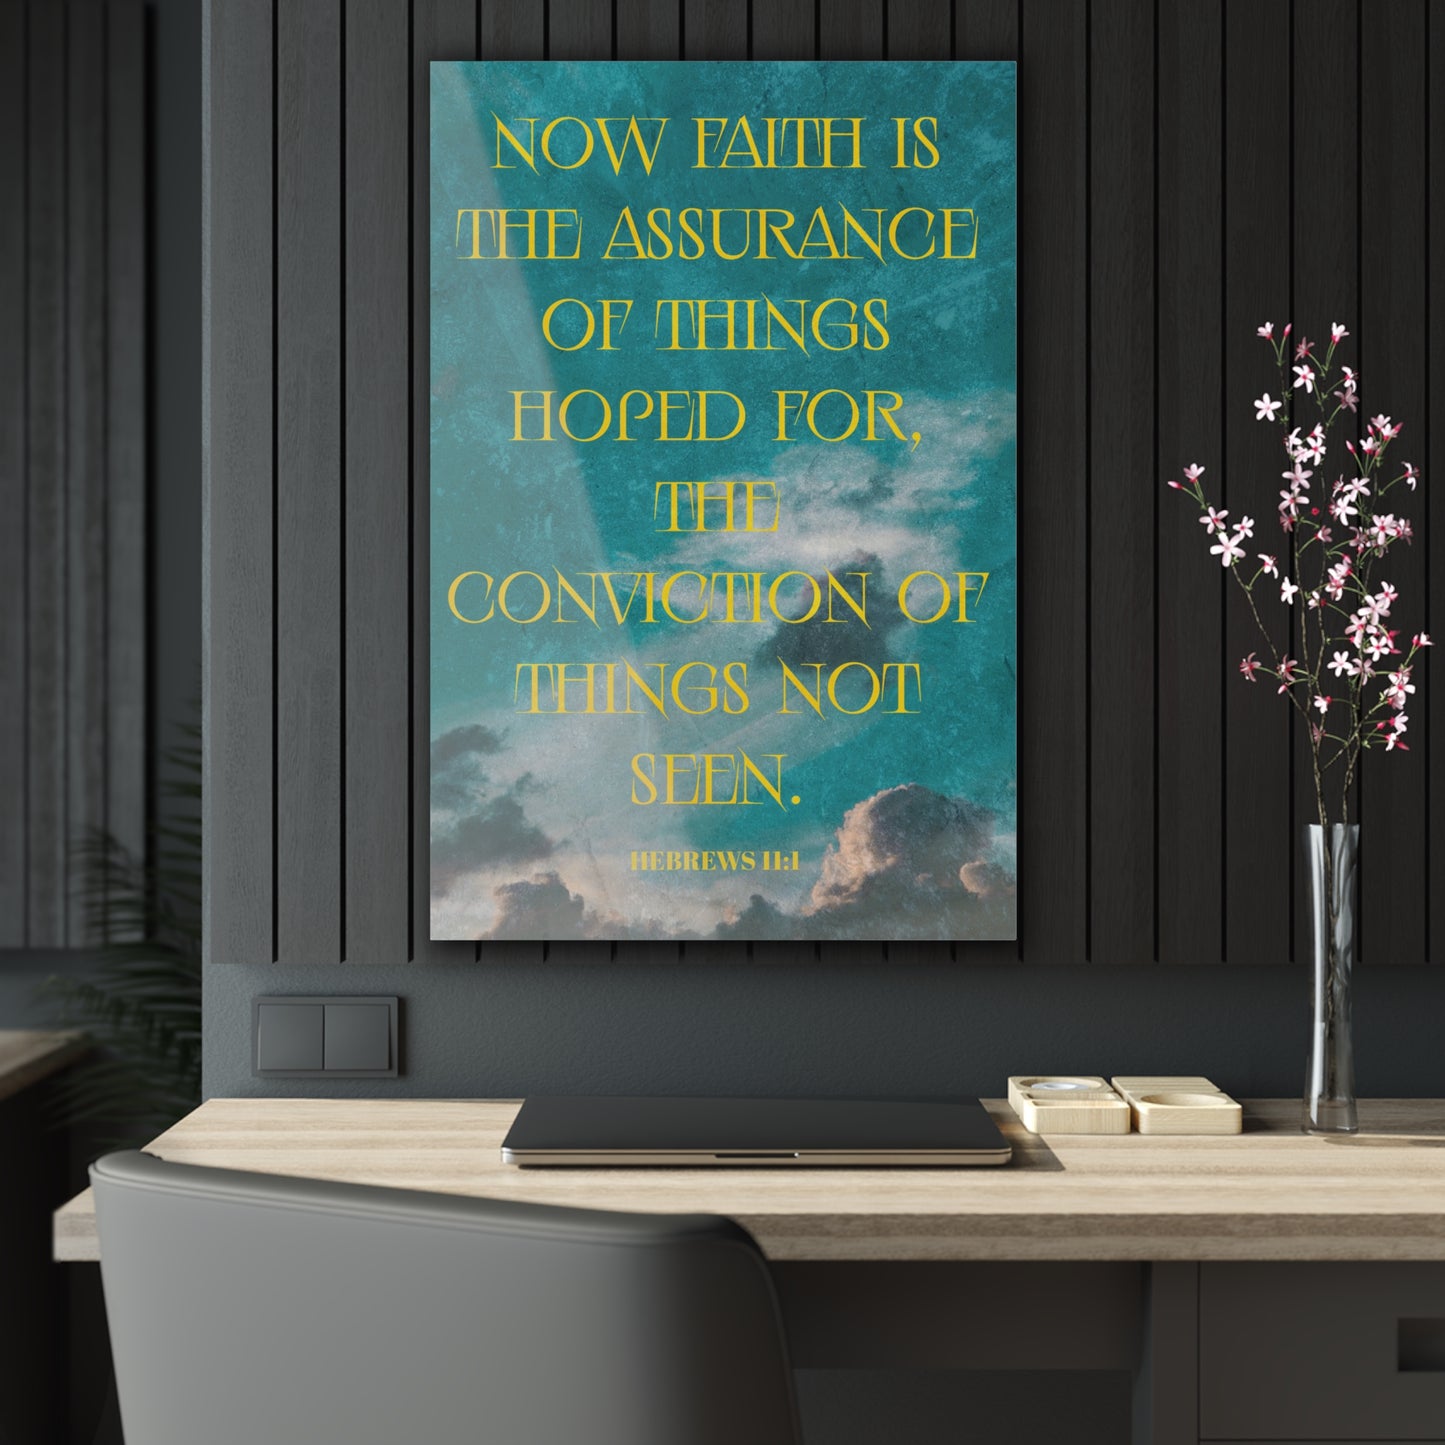 Bible Quote Large Bathroom Wall Art | Faith Assurance | Art & Wall Decor,Assembled in the USA,Assembled in USA,Decor,Home & Living,Home Decor,Indoor,Made in the USA,Made in USA,Poster